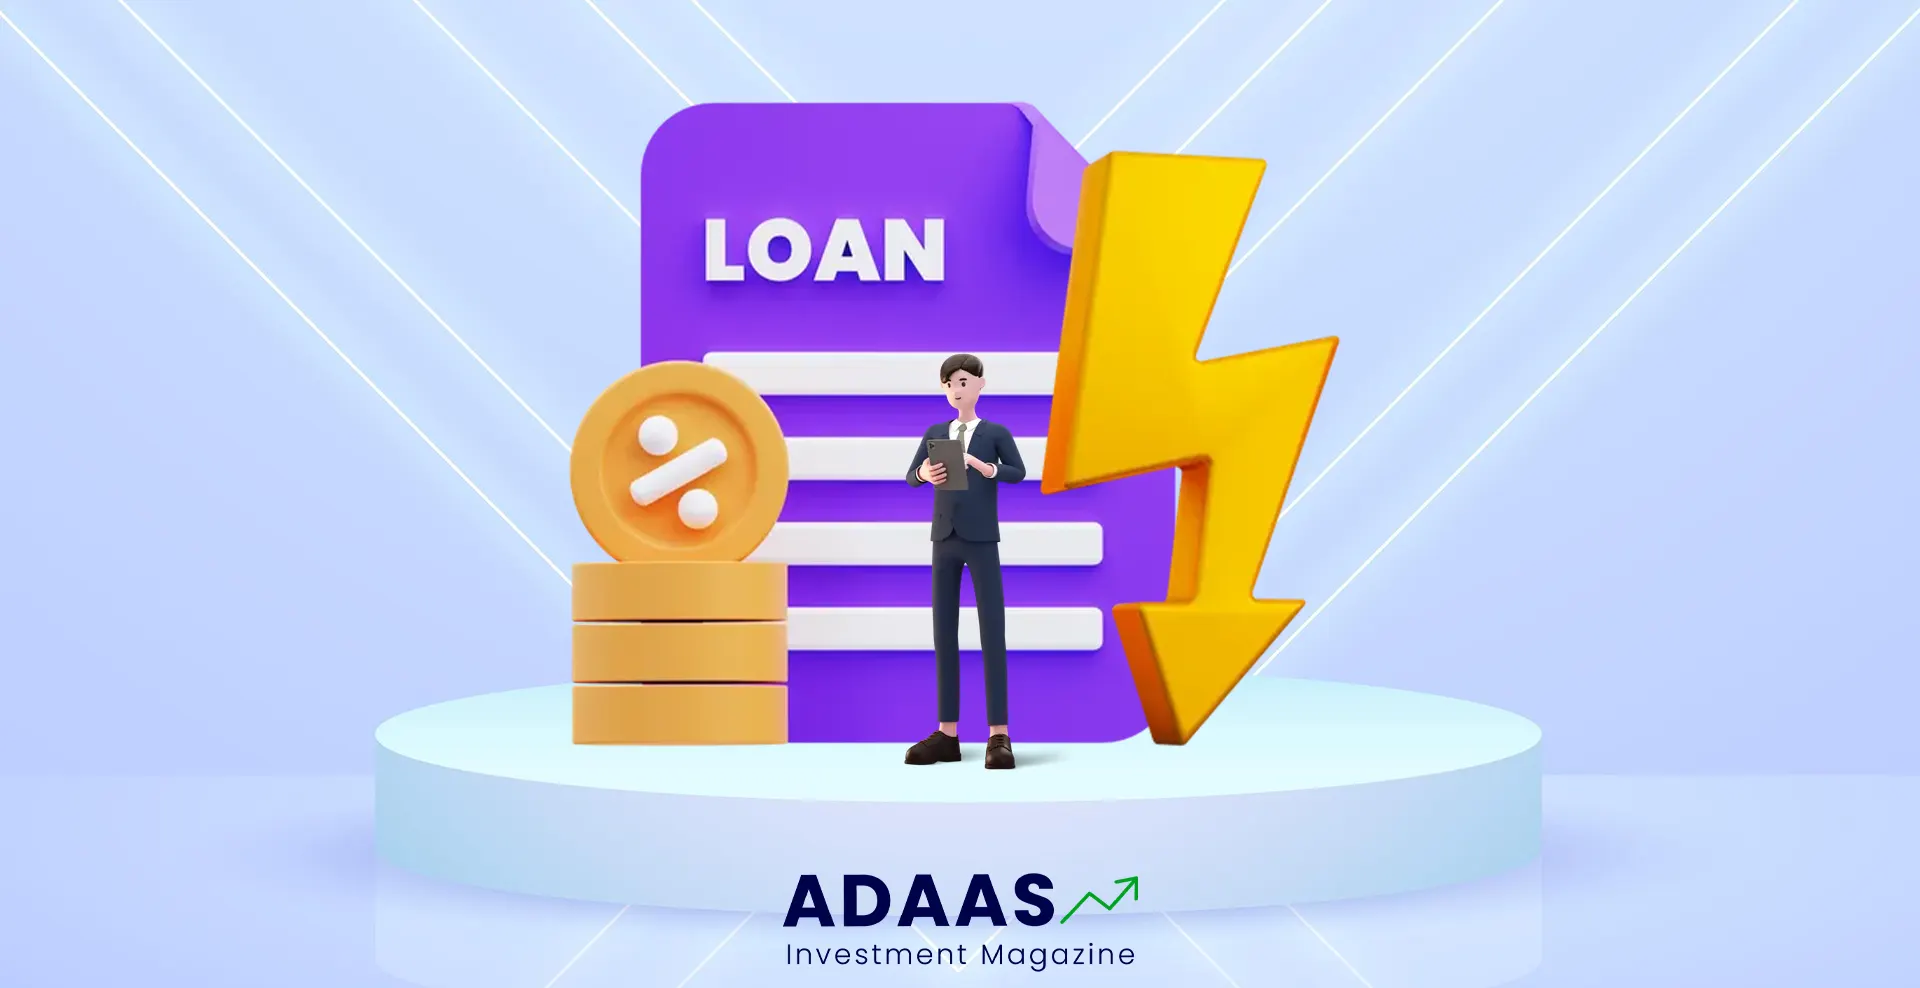 How to Use dydx Flash Loans